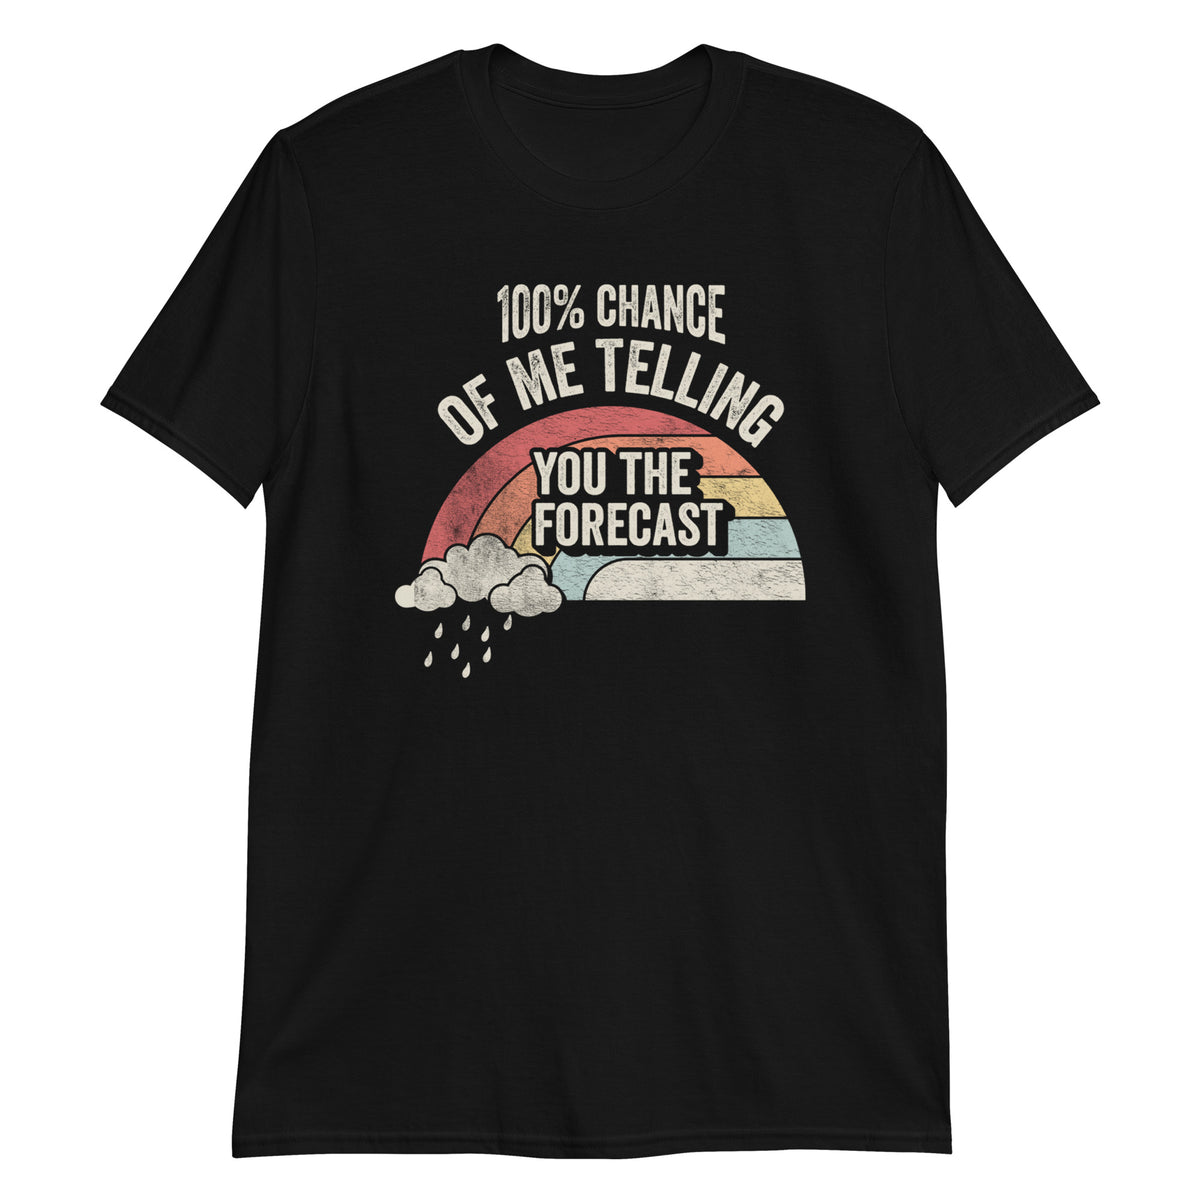 Retro Vintage 100% Chance Of Me Telling You The Forecast T-Shirt